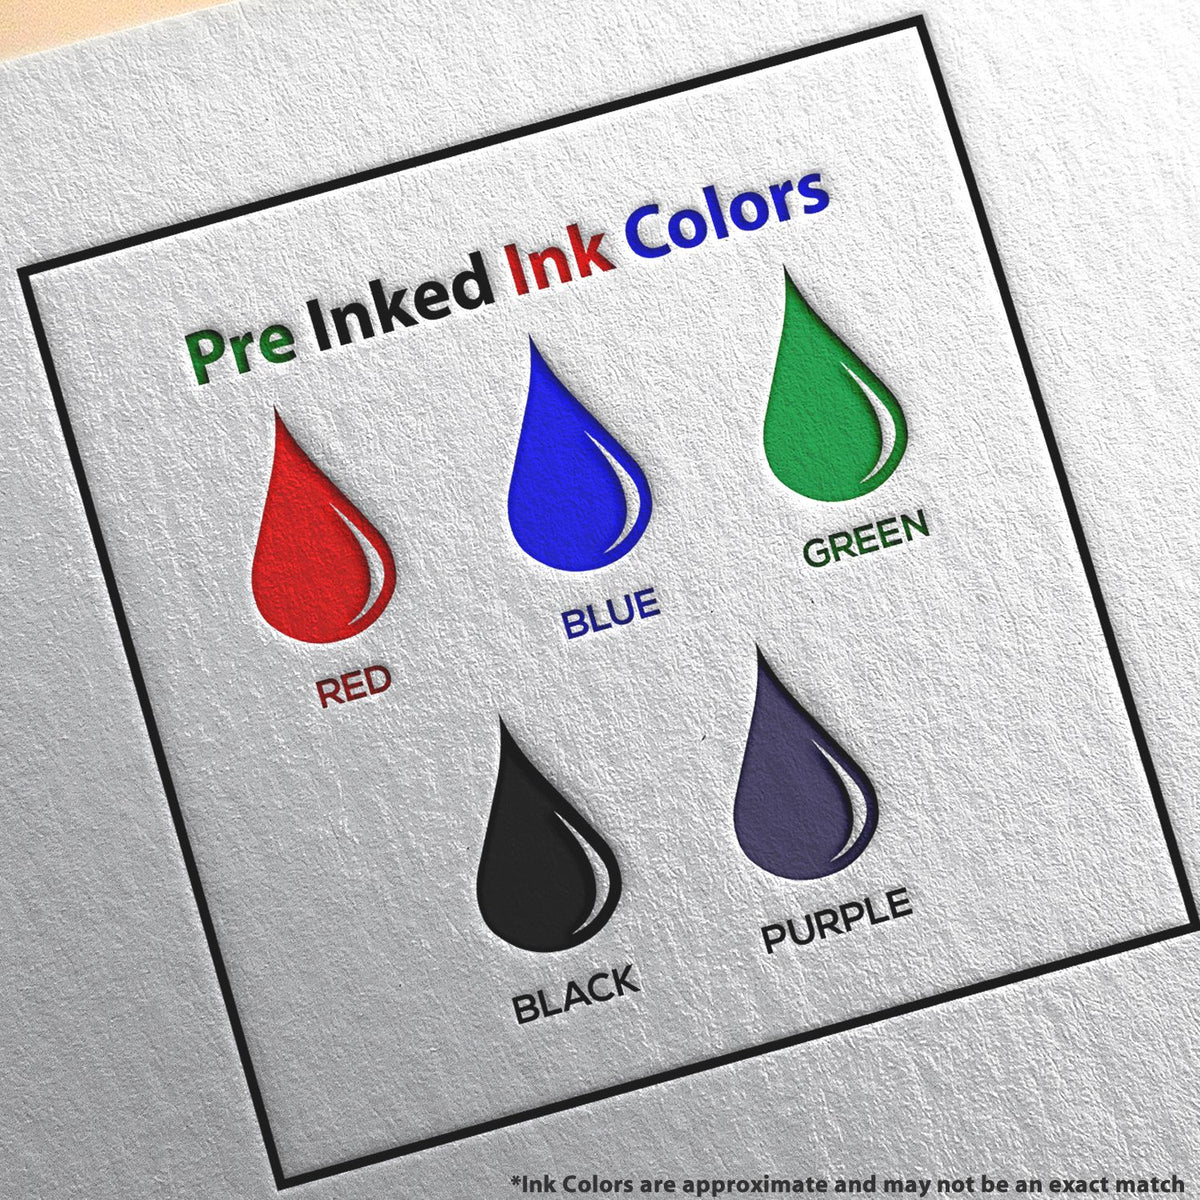 A picture showing the different ink colors or hues available for the Premium MaxLight Pre-Inked Missouri Landscape Architectural Stamp product.